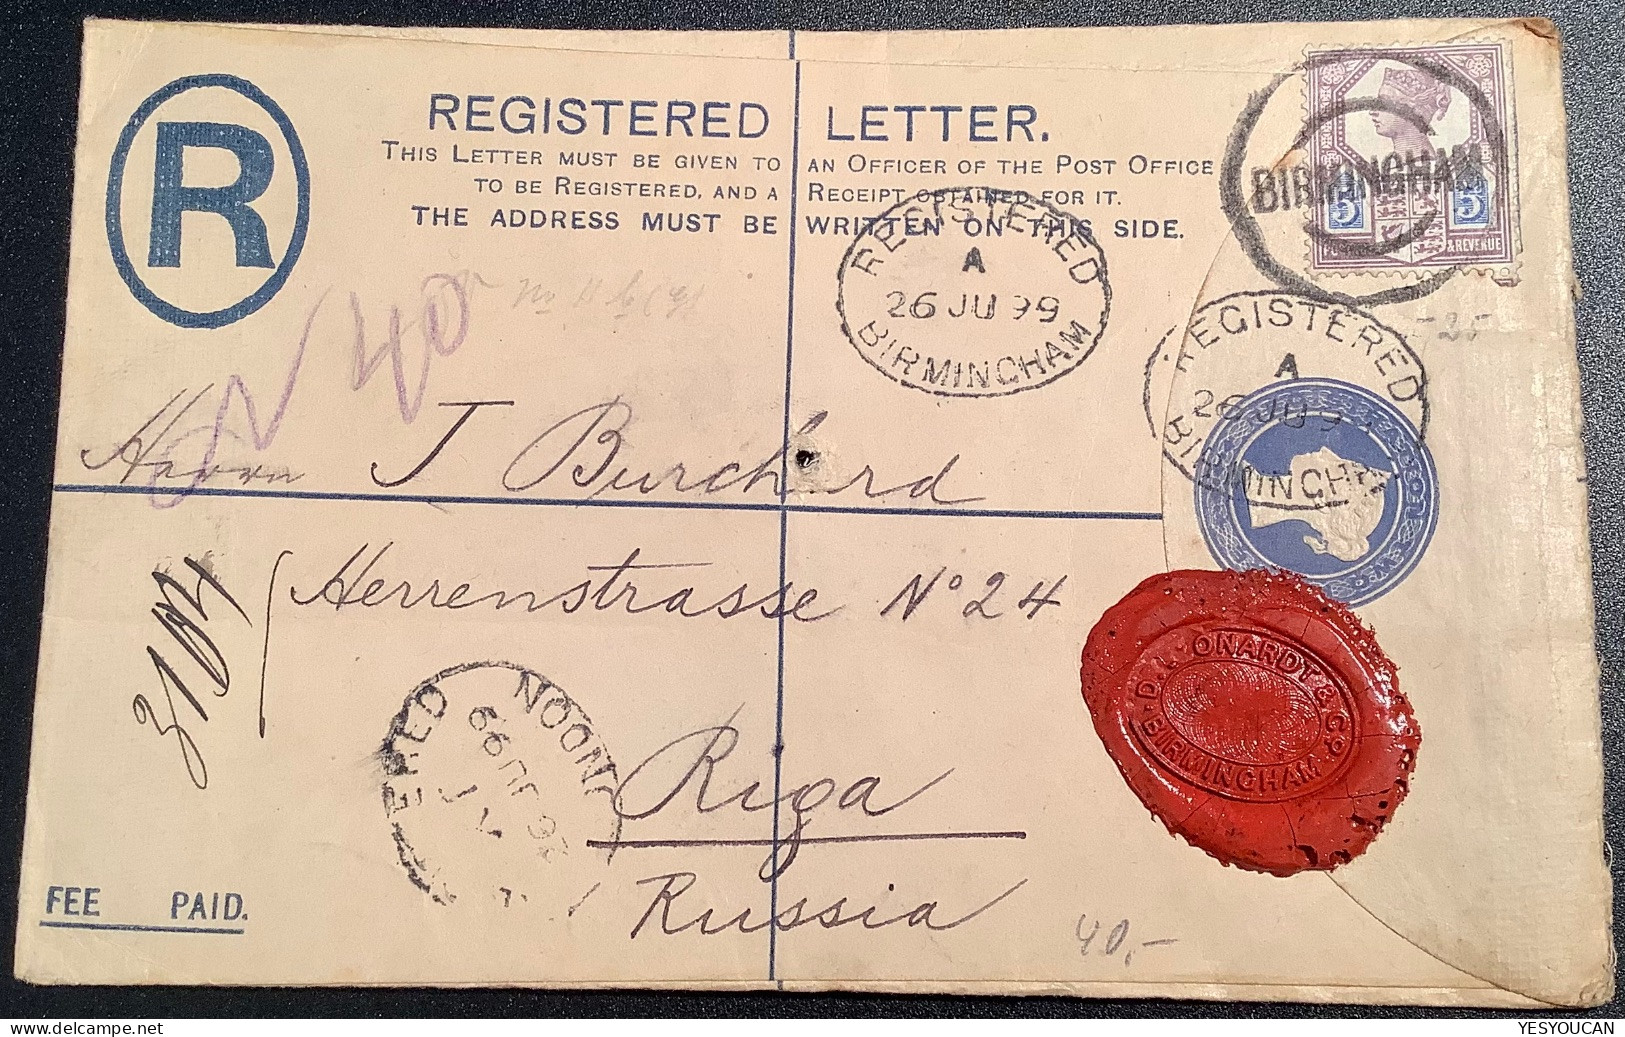 BIRMINGHAM 1899>RIGA, LATVIA-RUSSIA Cover ! GB Queen Victoria Jubilee Issue1887-1900 Postal Stationery Registered Letter - Covers & Documents